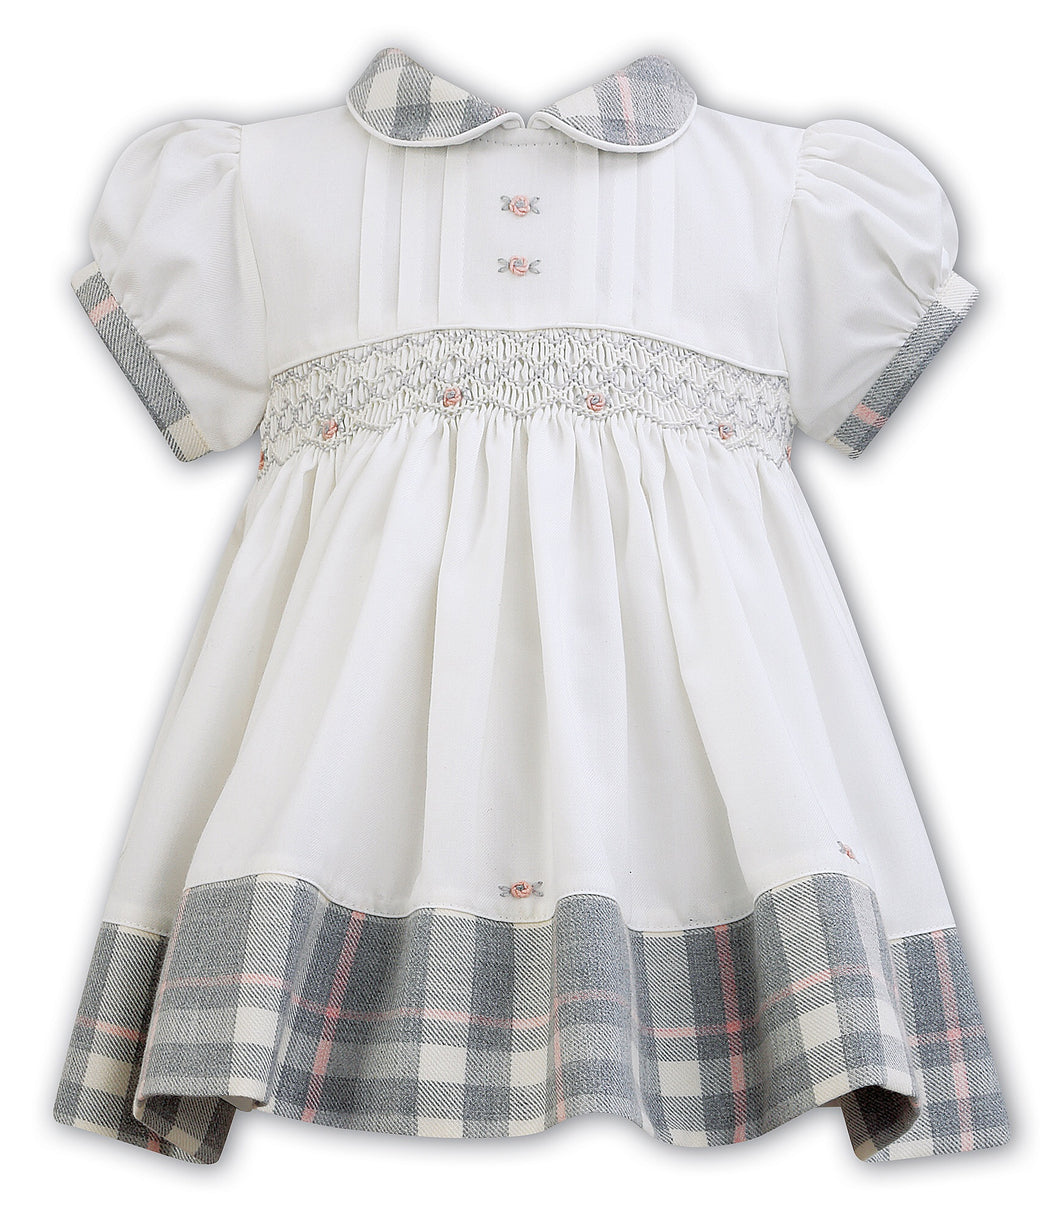 Girls Short Sleeved Dress with Delicate Embroidered Smocking Front, Tartan Trim on Sleeves, Hem and Peter Pan Collar